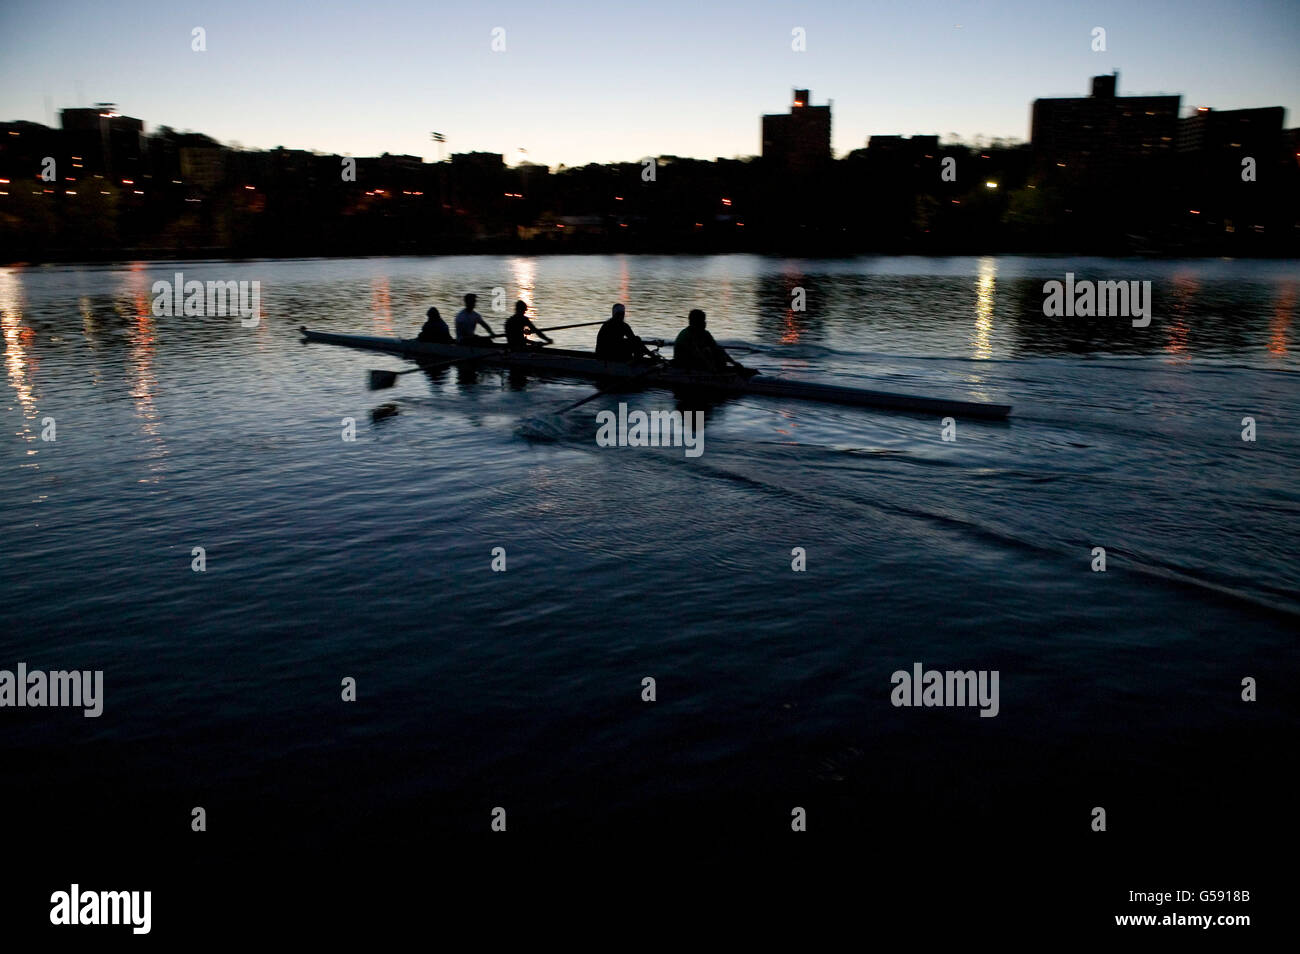 Manhattan College Rowing Club members on an early morning practice on Harlem River in New York City, USA, 9 November 2004. Stock Photo